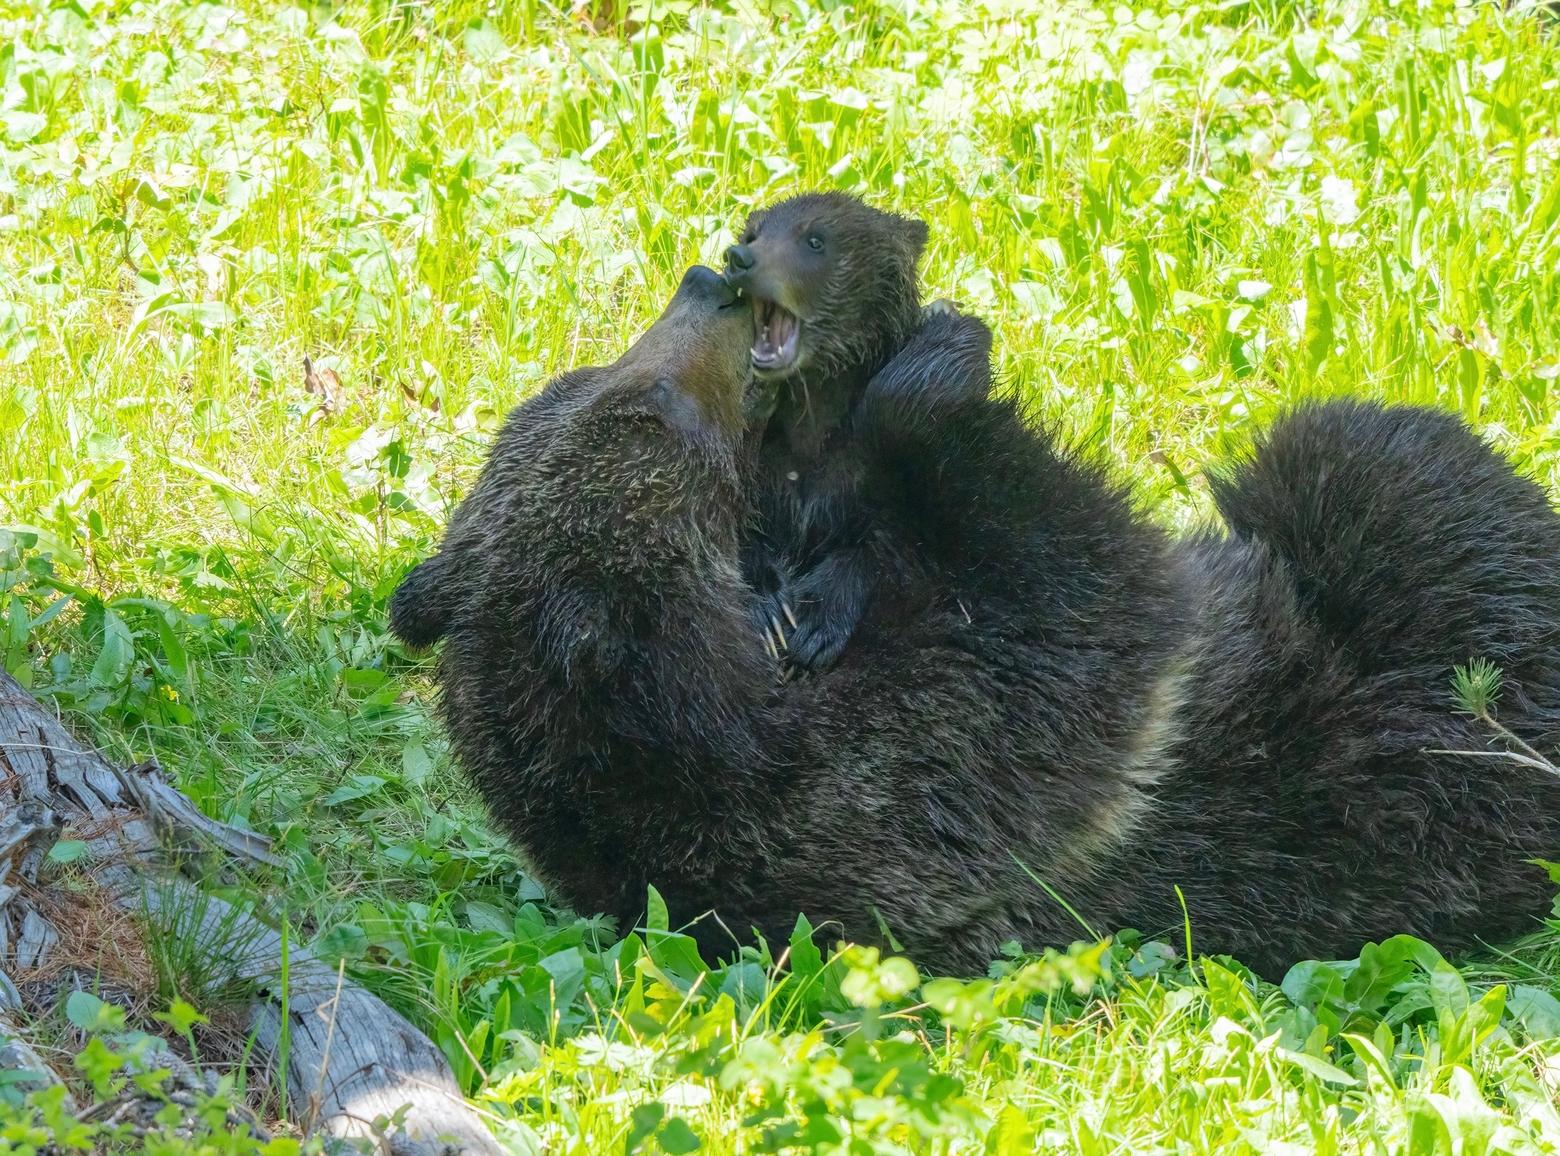 Do bear cubs giggle with delight when their mother tickles them? An observer would be hard-pressed to interpret the gentle rough-housing of 399 and the verbalizations coming out of her cub any other way.